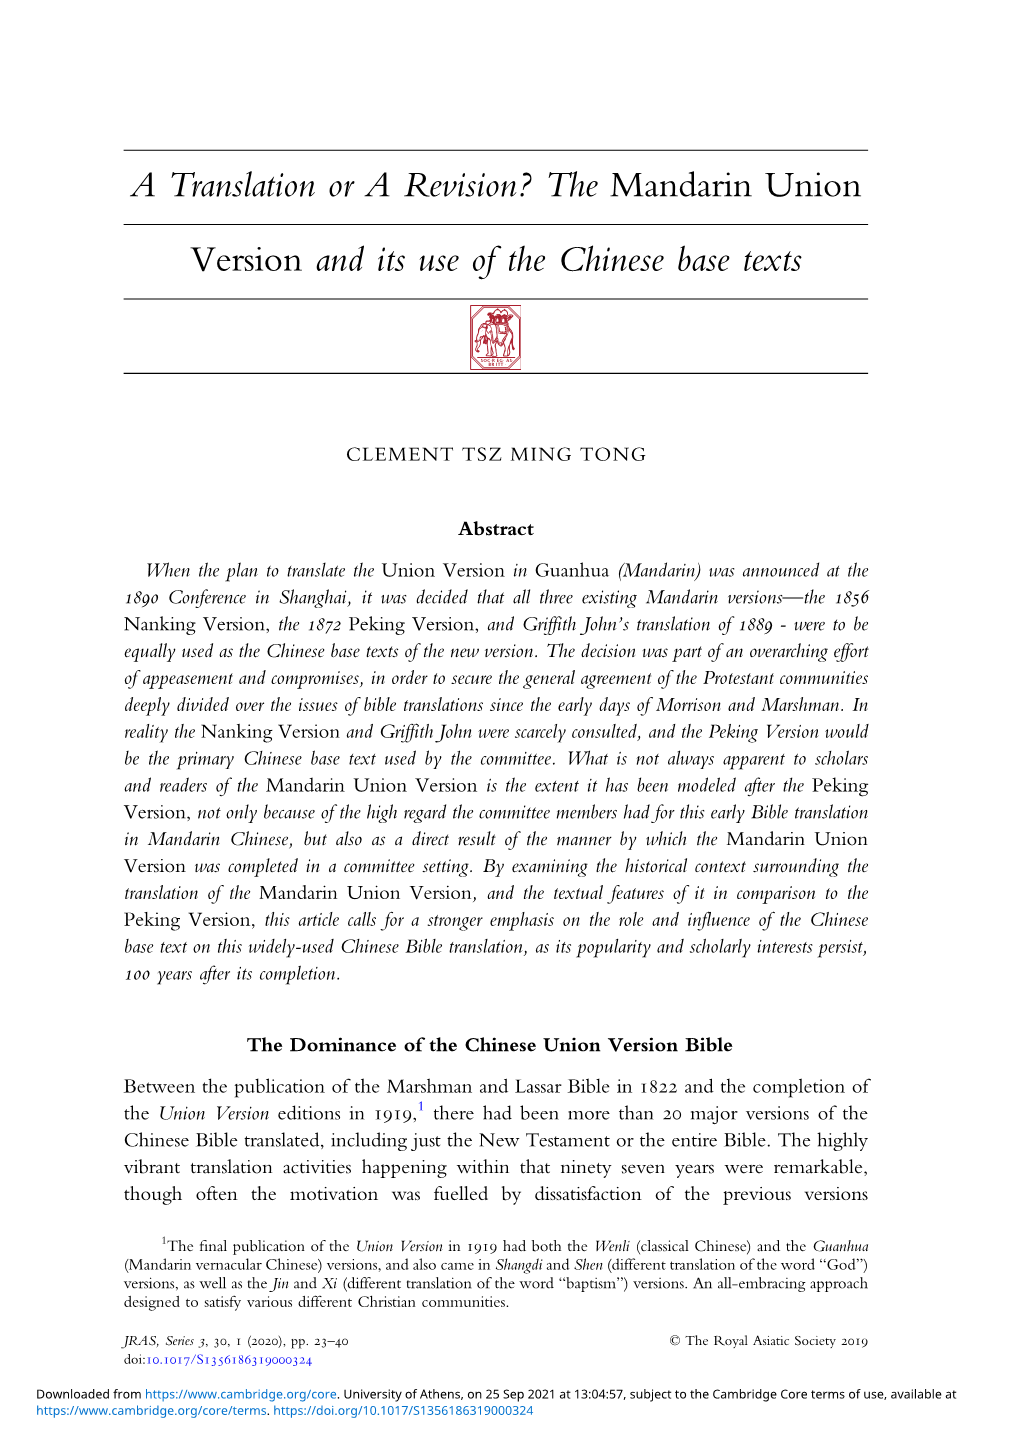 A Translation Or a Revision? the Mandarin Union Version and Its Use of the Chinese Base Texts